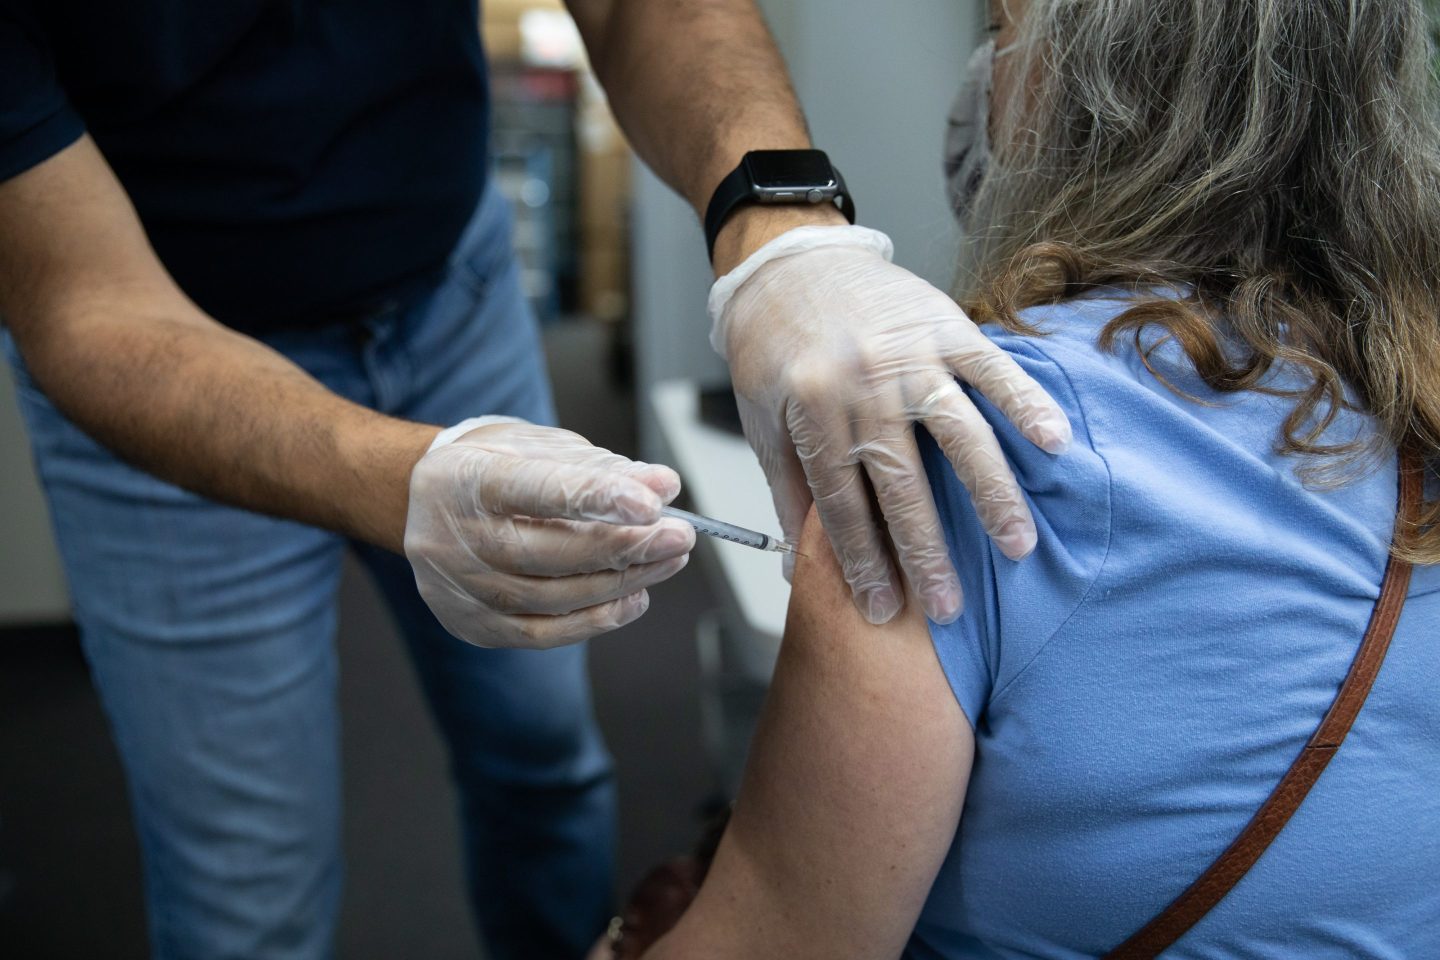 A pharmacist administers a third dose of the Pfizer-BioNTech Covid-19 vaccine to a customer at a pharmacy in Livonia, Michigan, U.S., on Tuesday, Aug. 17, 2021. Americans with weakened immune systems will be allowed to get three shots of Covid-19 vaccine after U.S. regulators authorized giving an extra dose to the most vulnerable people. Photographer: Emily Elconin/Bloomberg via Getty Images